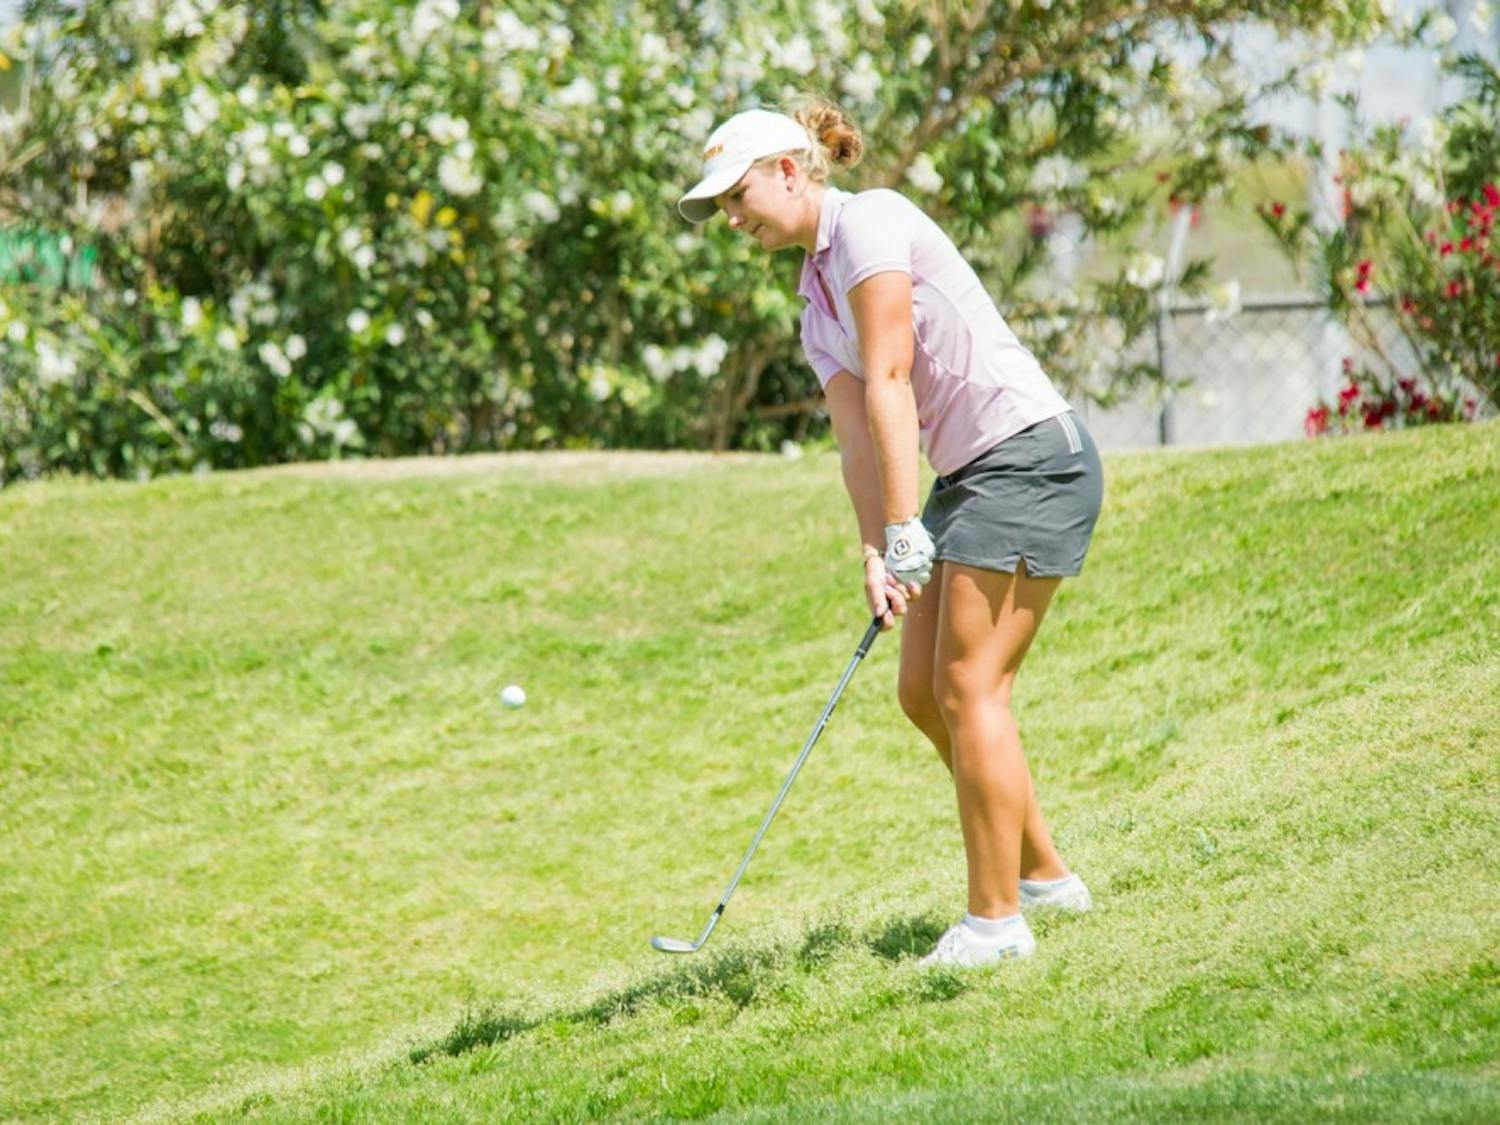 Then-freshman Linnea Strom chips her ball out of the rough on the fifth hole Friday, April 8, 2016 during the 2016 Ping ASU Invitational at Karsten Golf Course in Tempe, Arizona.